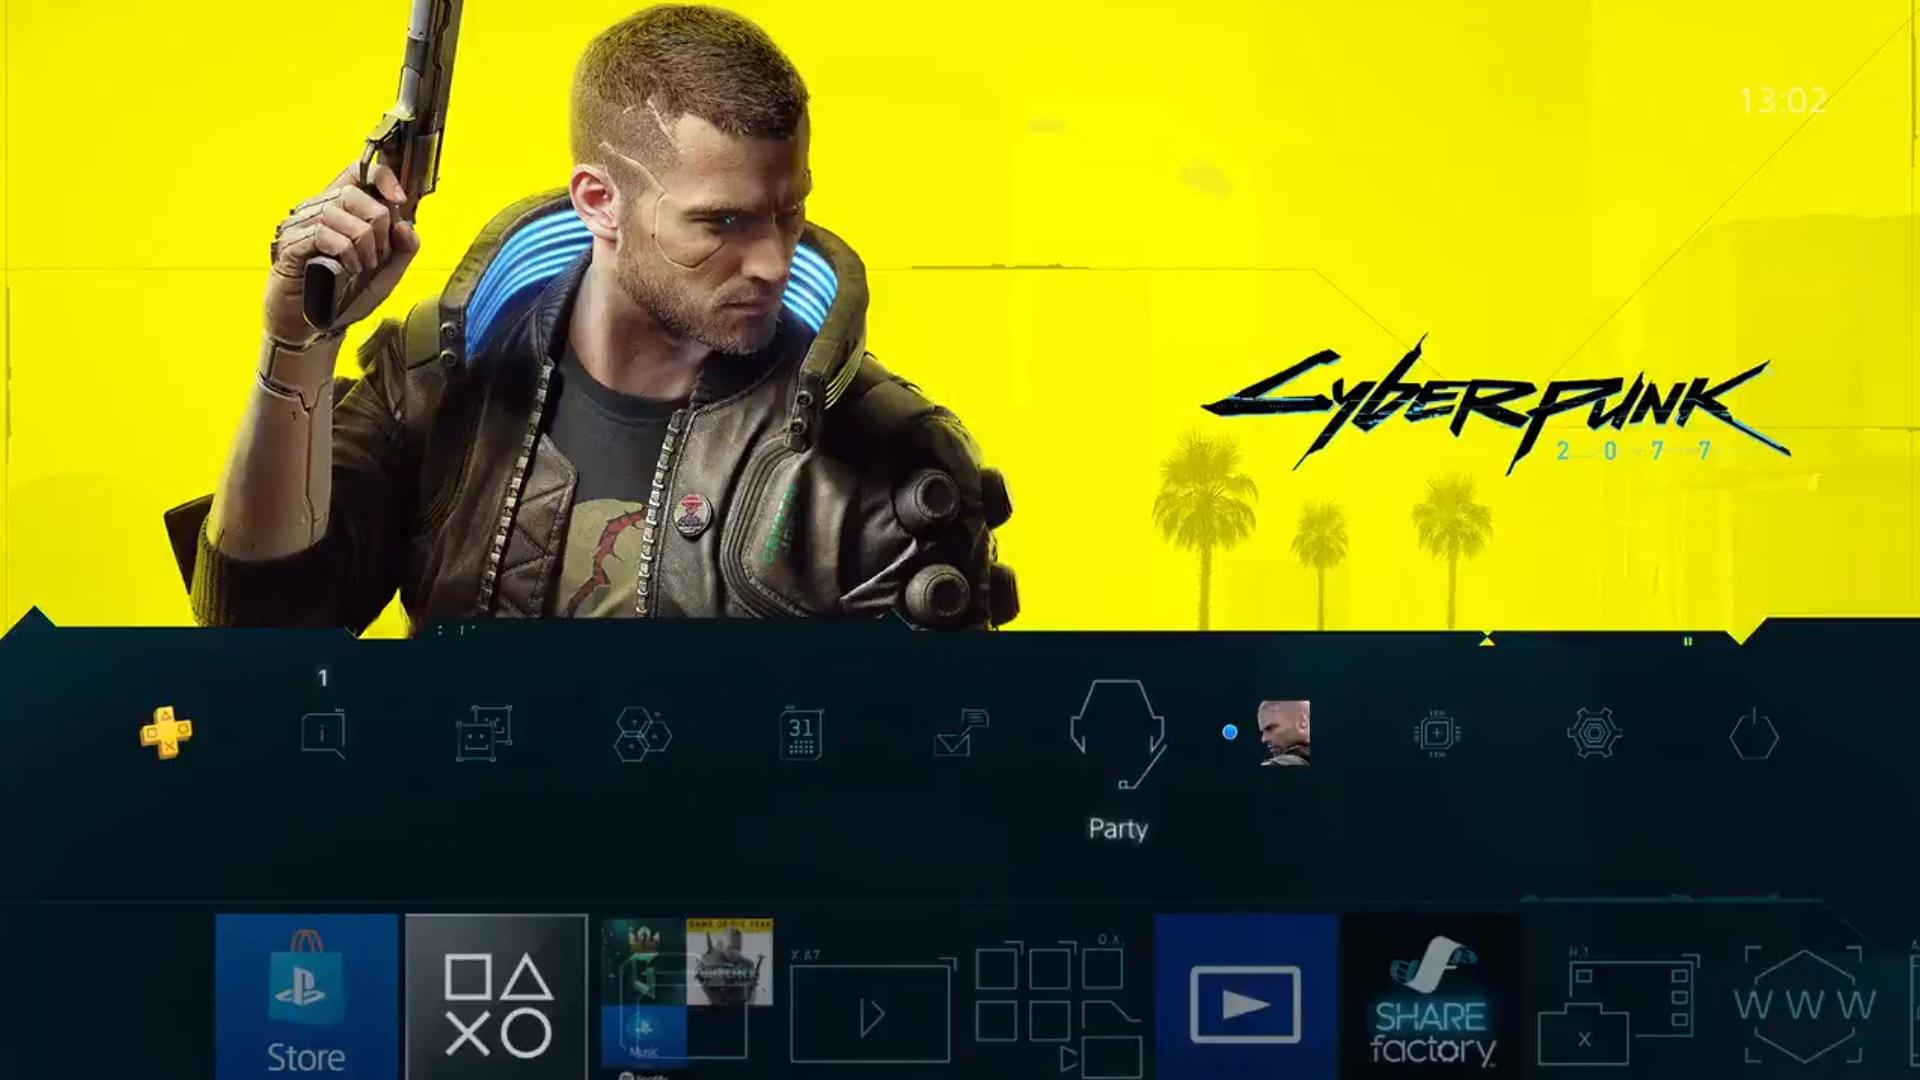 Cyberpunk 2077 PS4 Theme Makes Your PS4 Go Beep Boop And It's